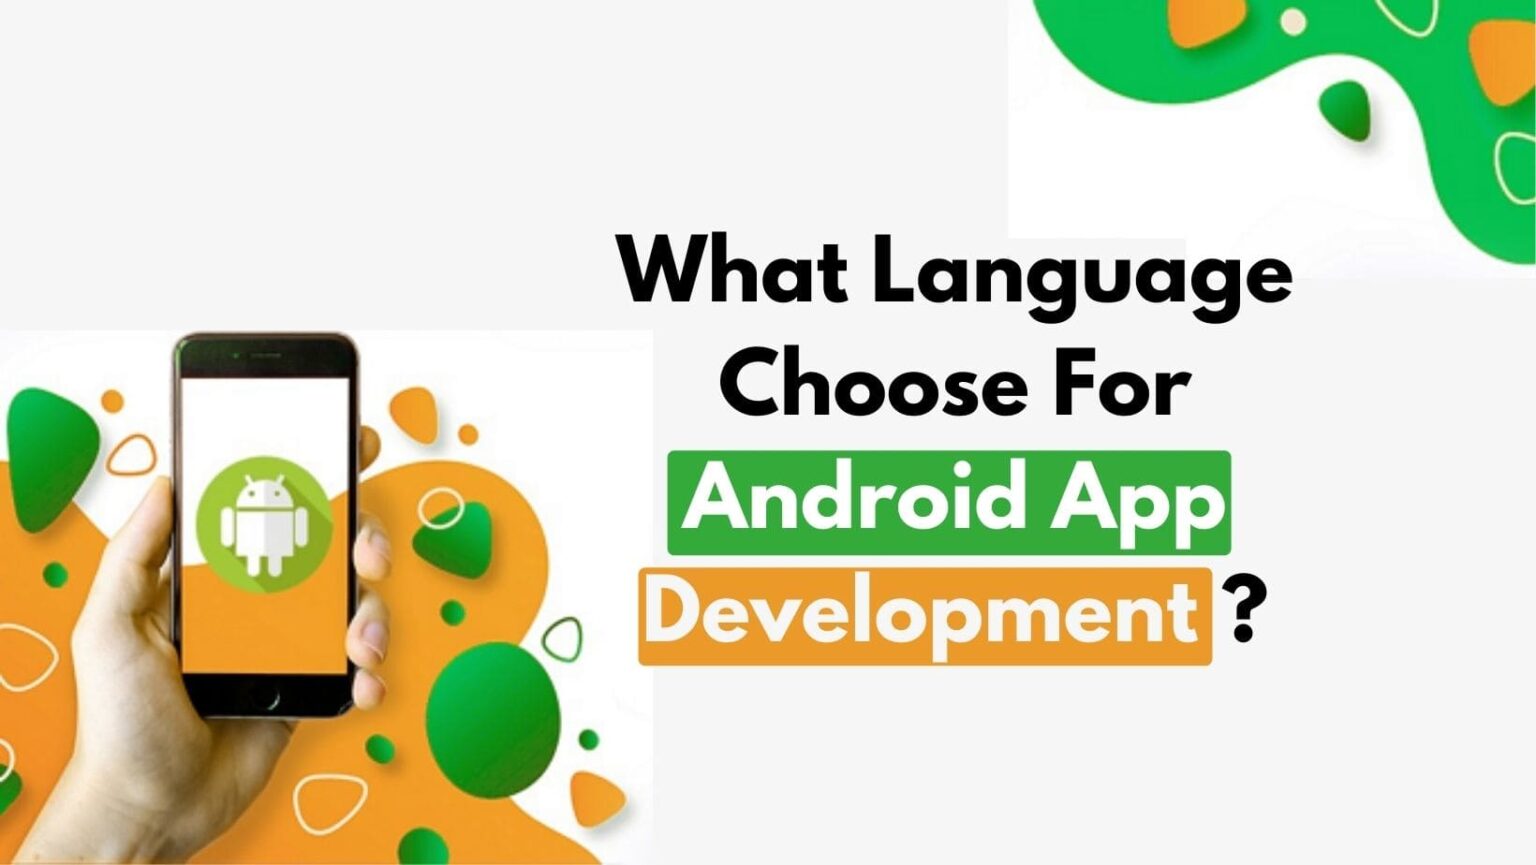 What Language Choose For Android App Development?